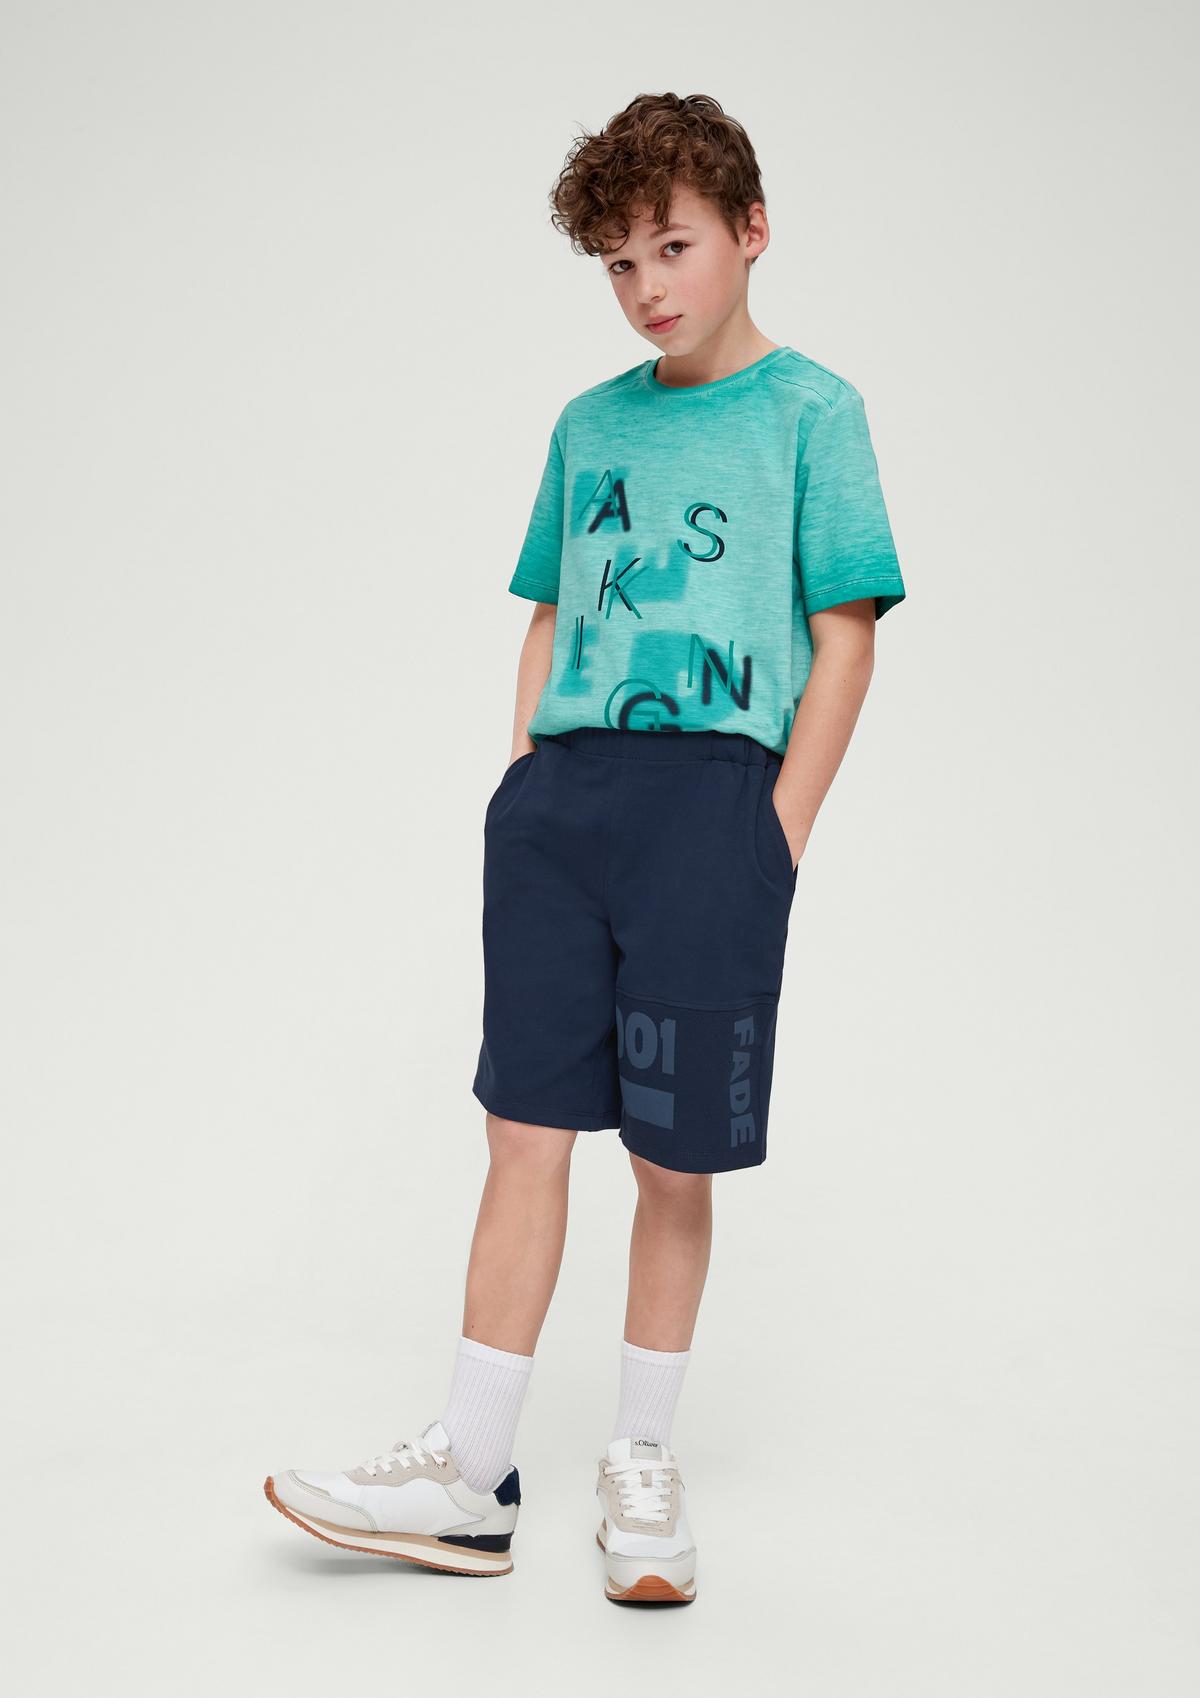 Find Bermuda shorts for boys and teens online